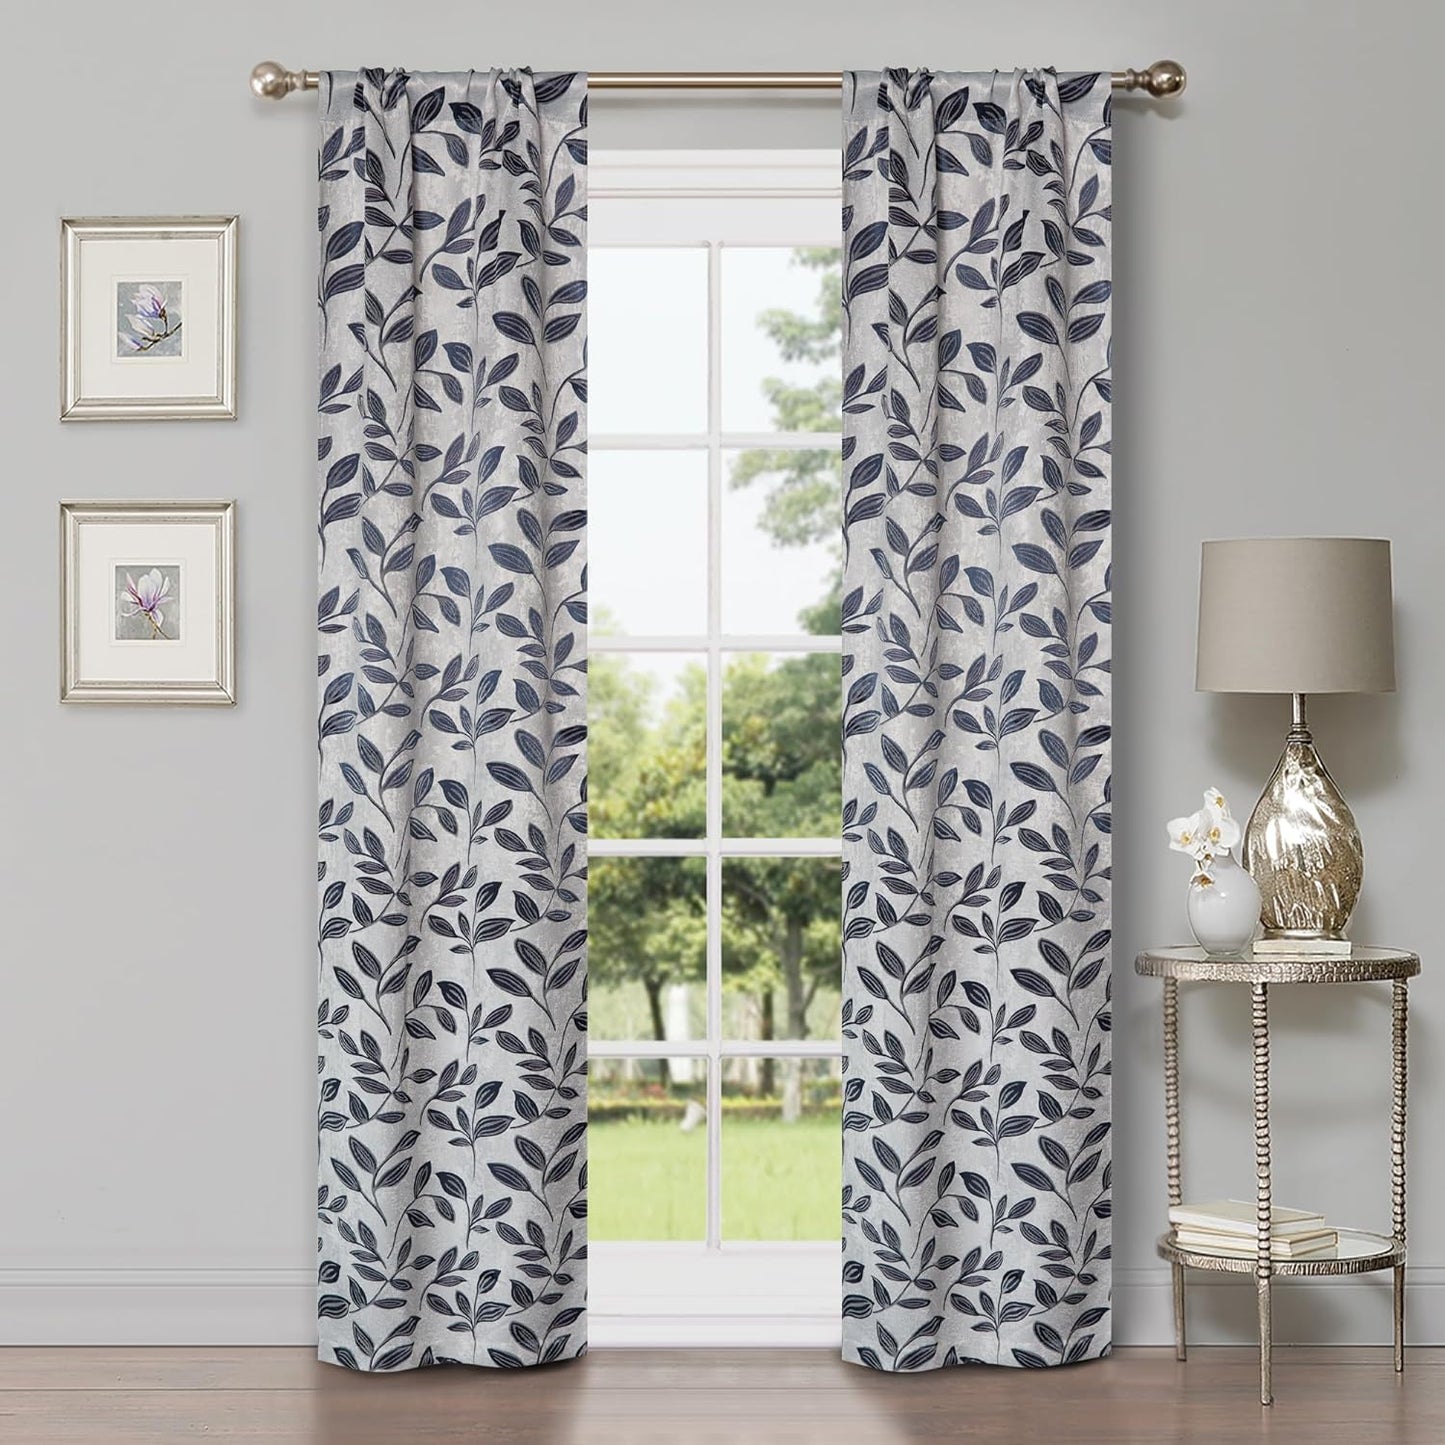 Superior Blackout Curtains, Room Darkening Window Accent for Bedroom, Sun Blocking, Thermal, Modern Bohemian Curtains, Leaves Collection, Set of 2 Panels, Rod Pocket - 52 in X 63 In, Nickel Black  Home City Inc. White-Navy Blue 26 In X 84 In (W X L) 